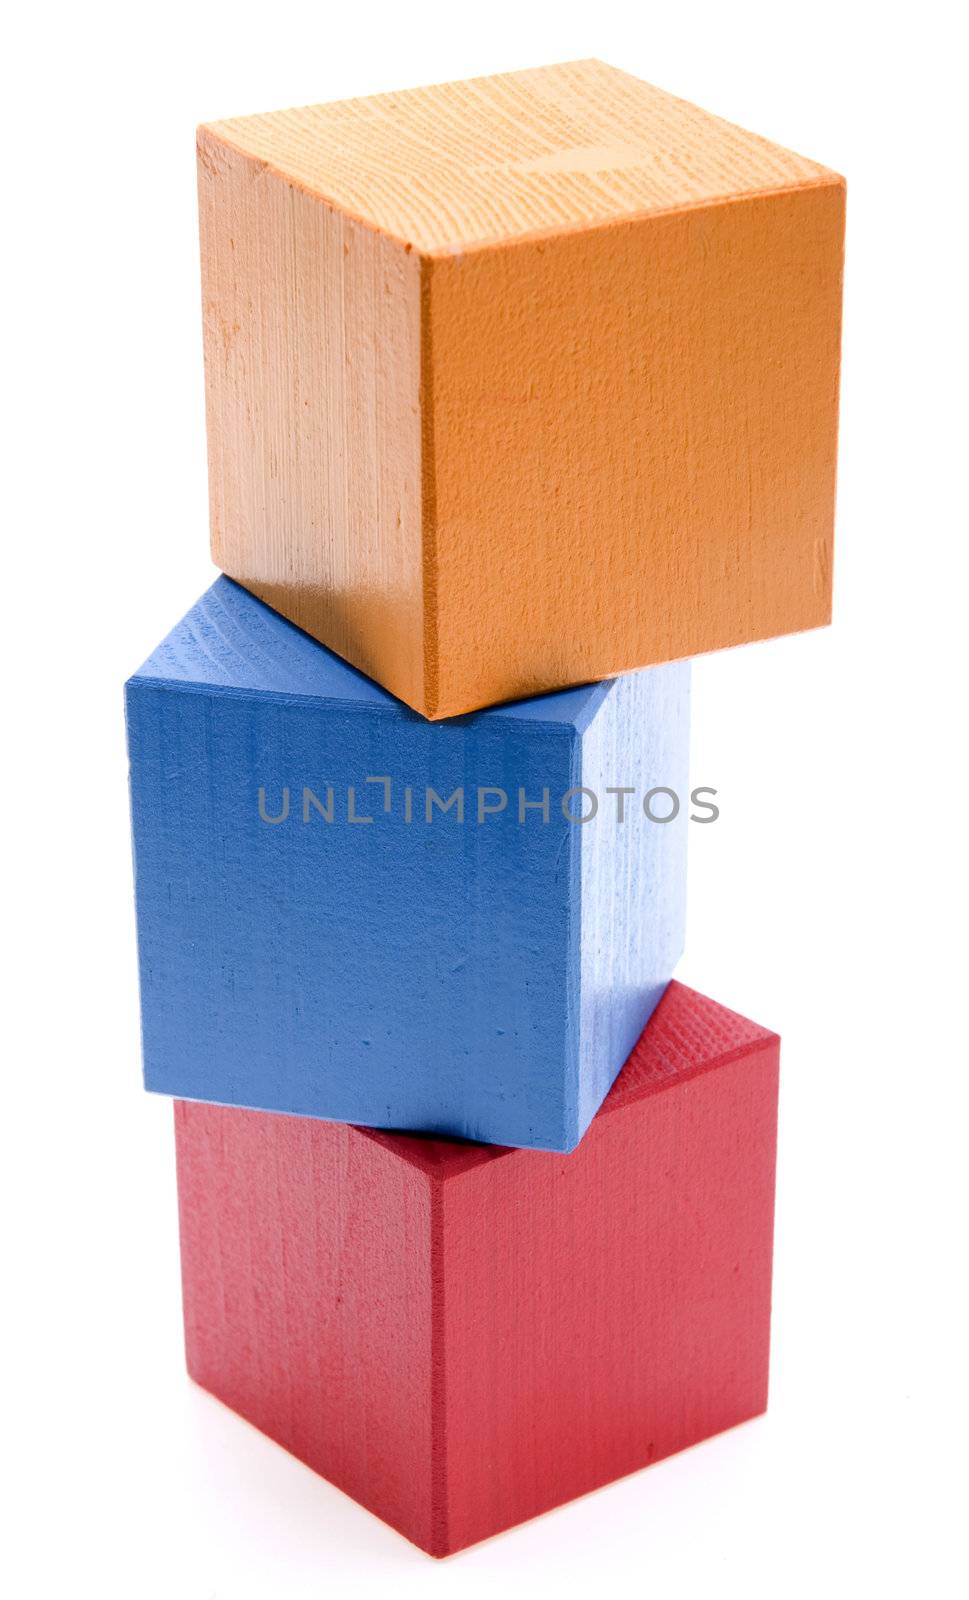 Toy cube color tower isolated